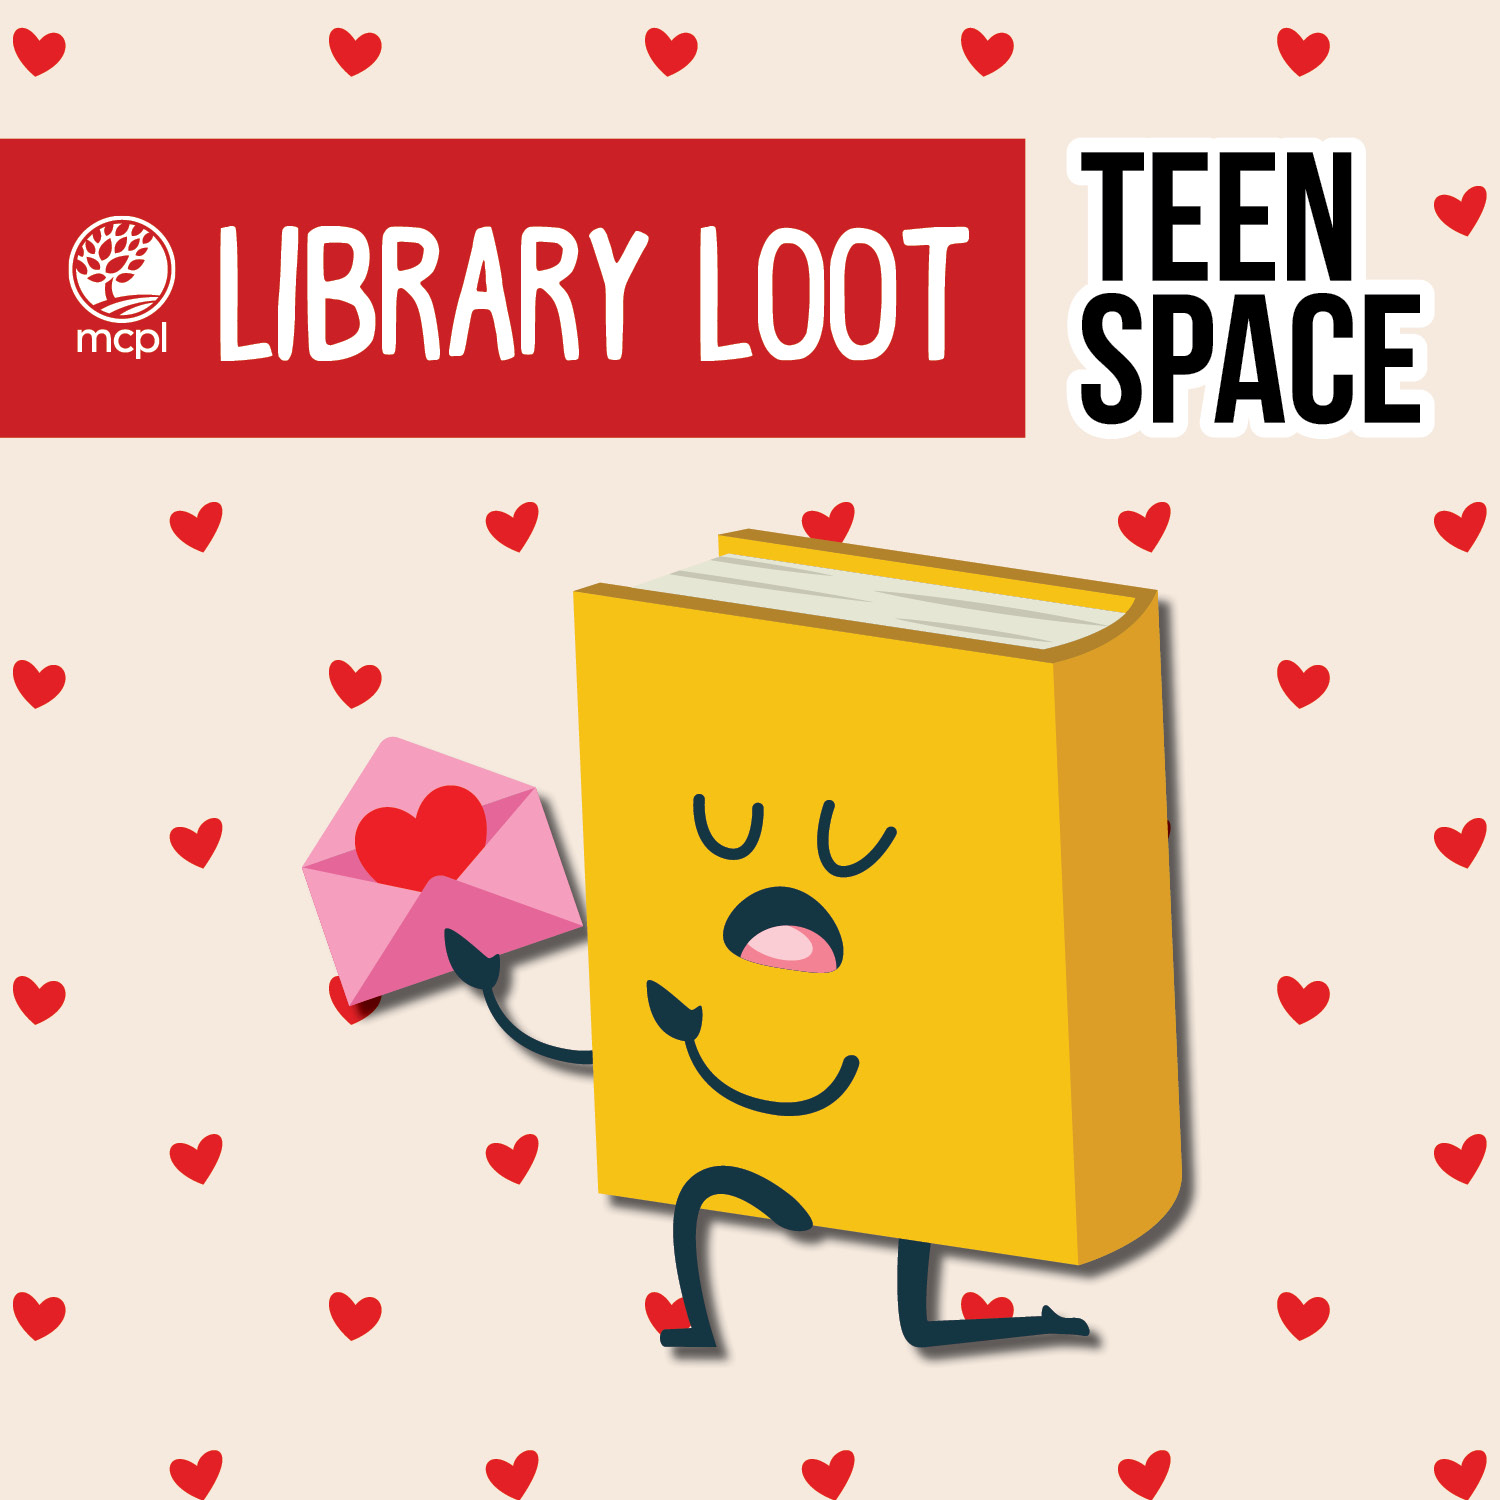 Library Loot Teen Space